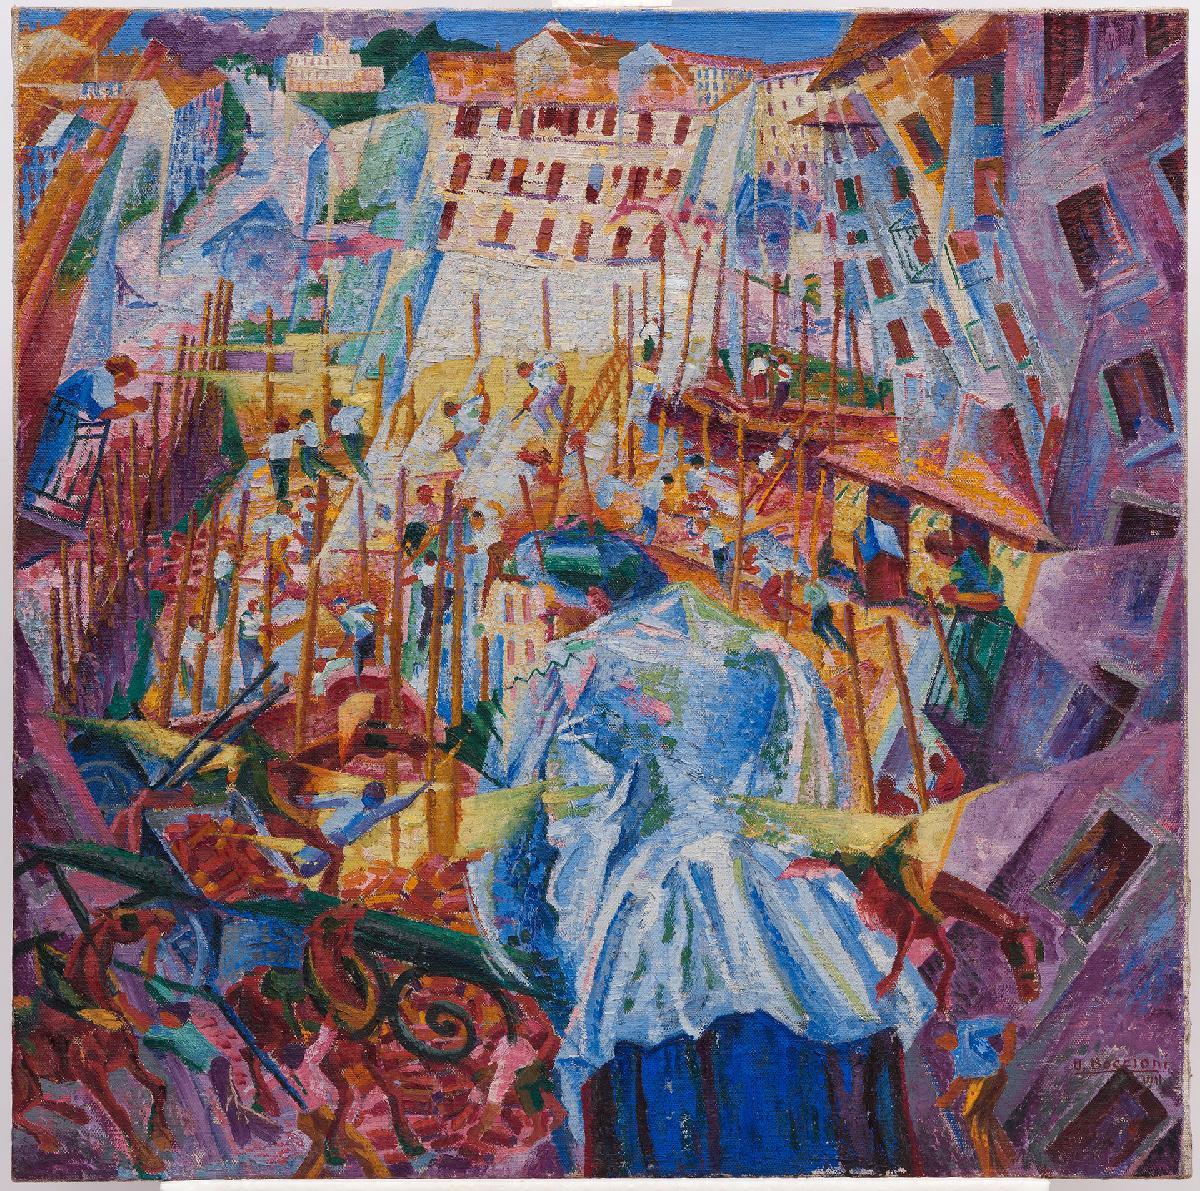 Umberto Boccioni, The Street Enters the House, 1911, oil on canvas, 100 x 100.6 cm (Sprengel Museum, Hannover)